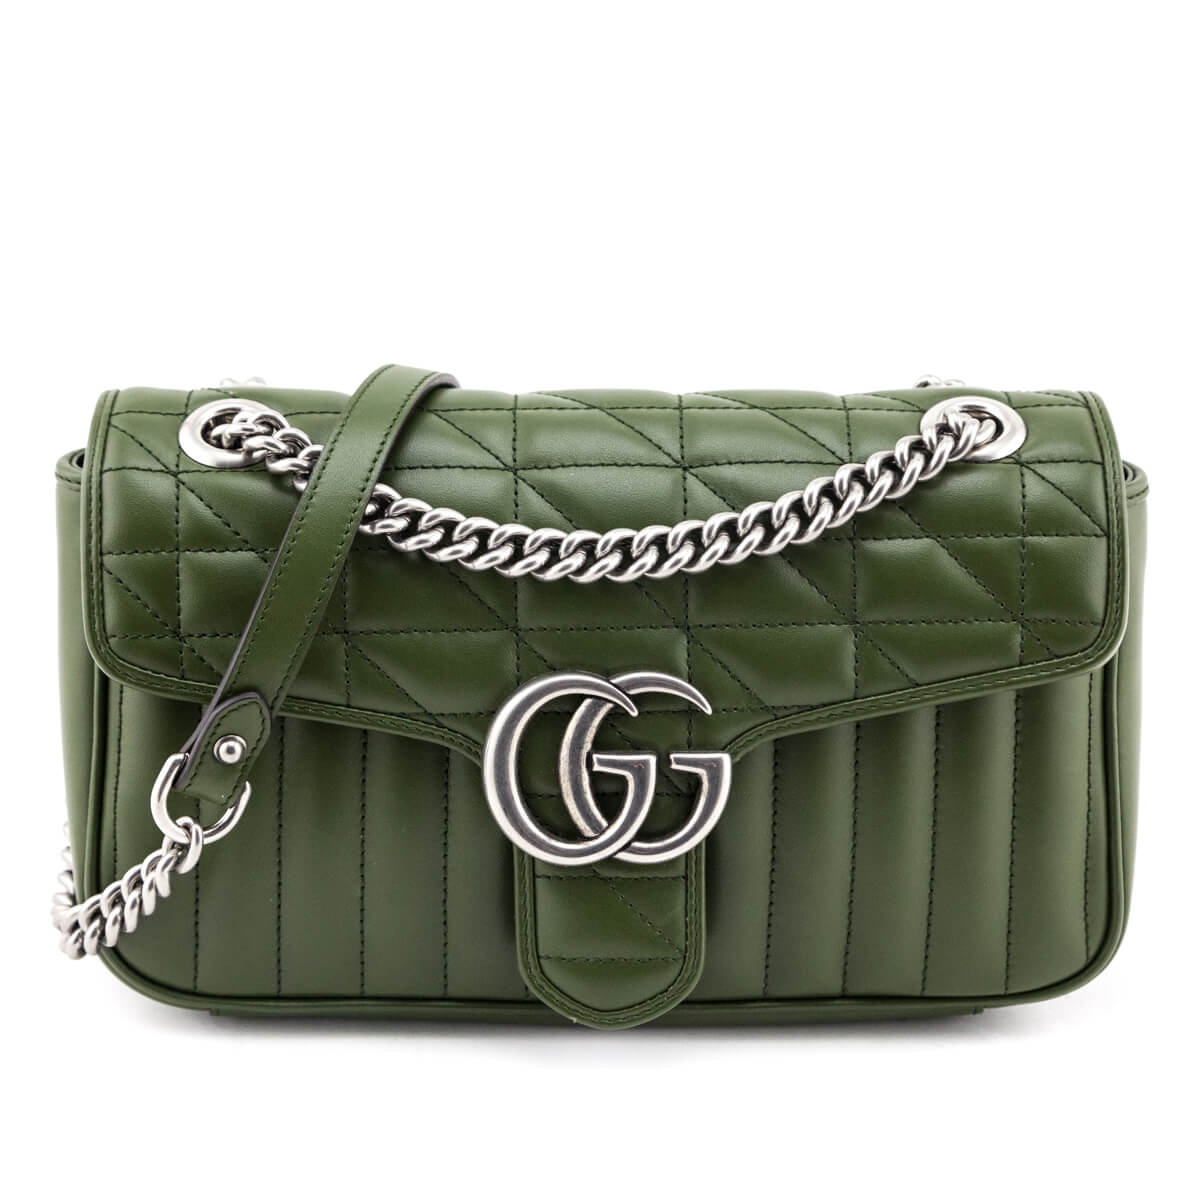 Gucci Forest Green Calfskin Matelasse Aria Small GG Marmont Shoulder Bag - Love that Bag etc - Preowned Authentic Designer Handbags & Preloved Fashions